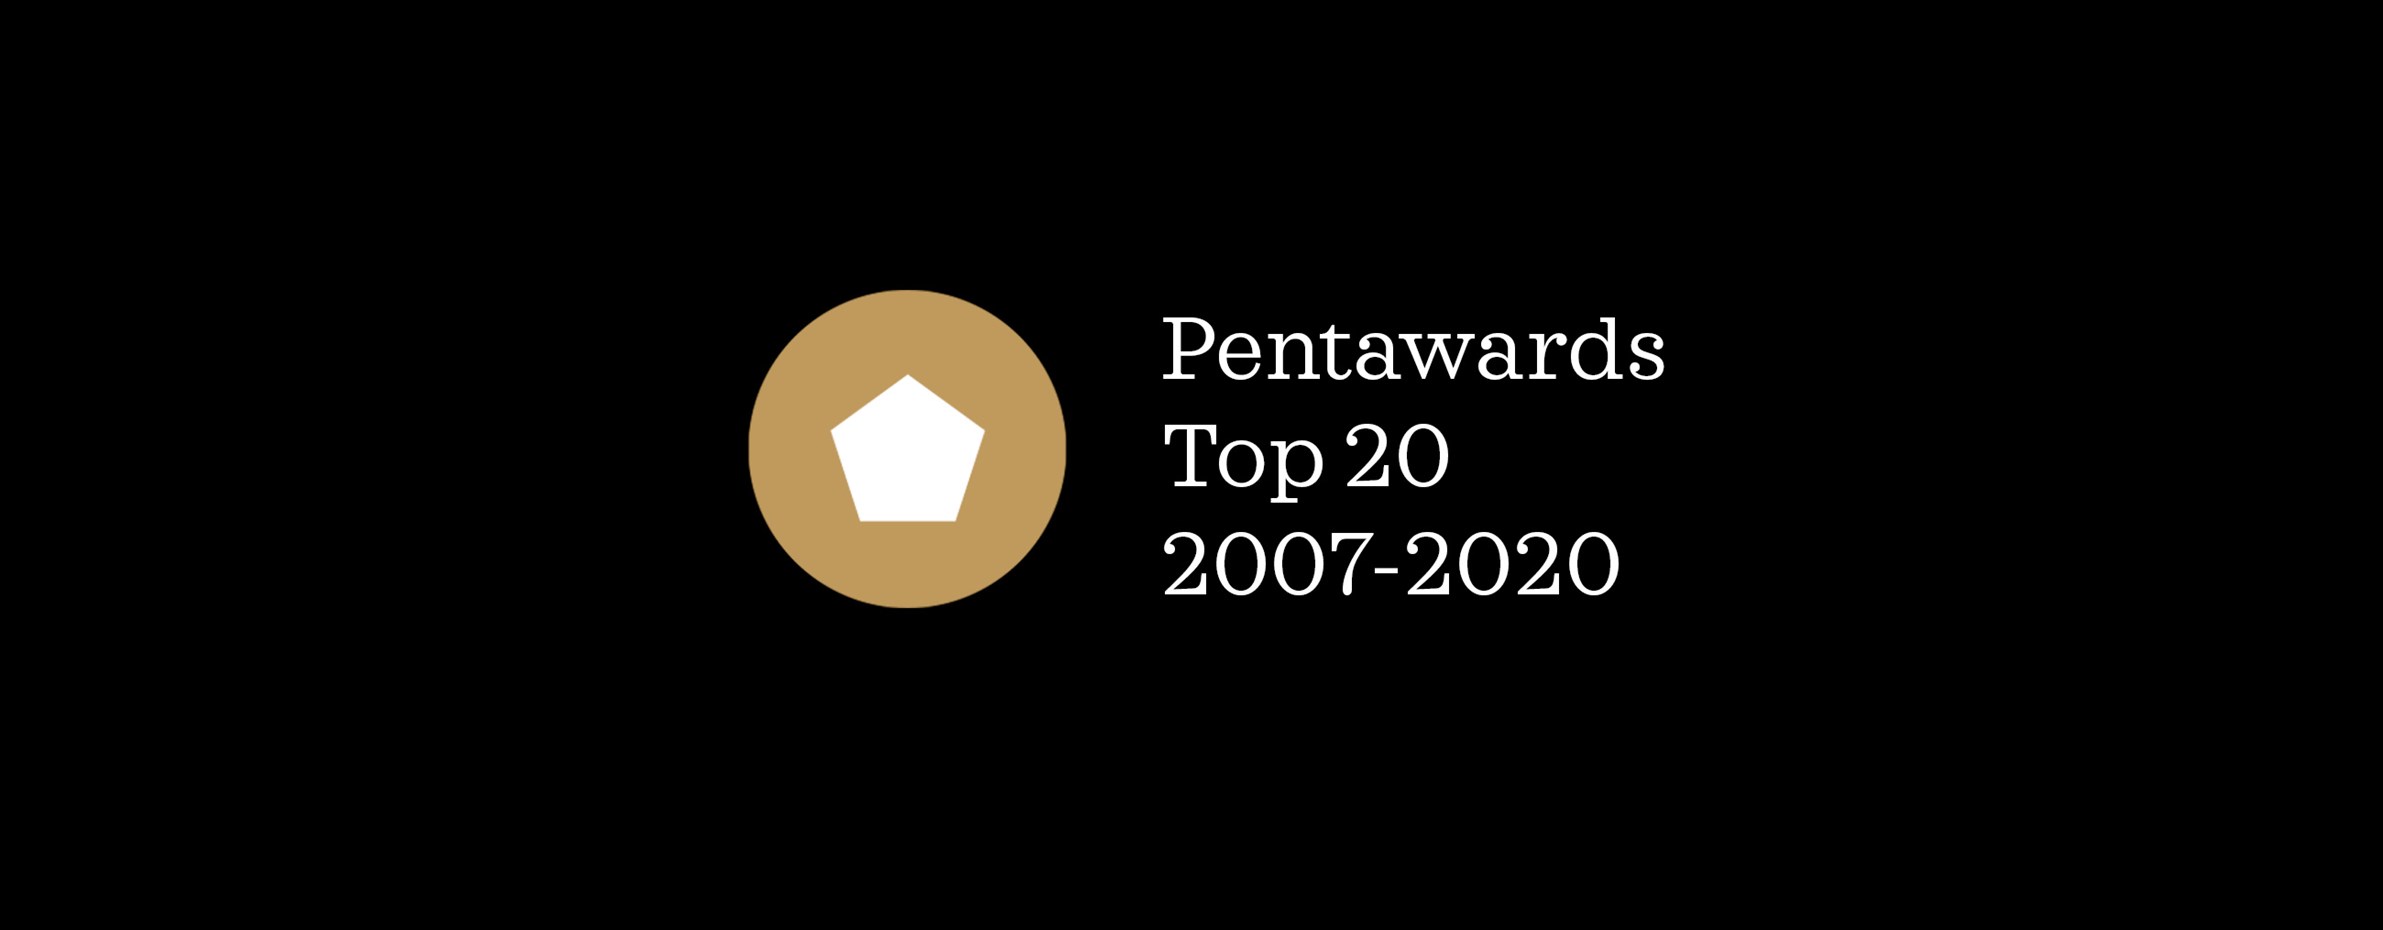 Pentawards Unveils Top 20 All-Time Winners Table, The League